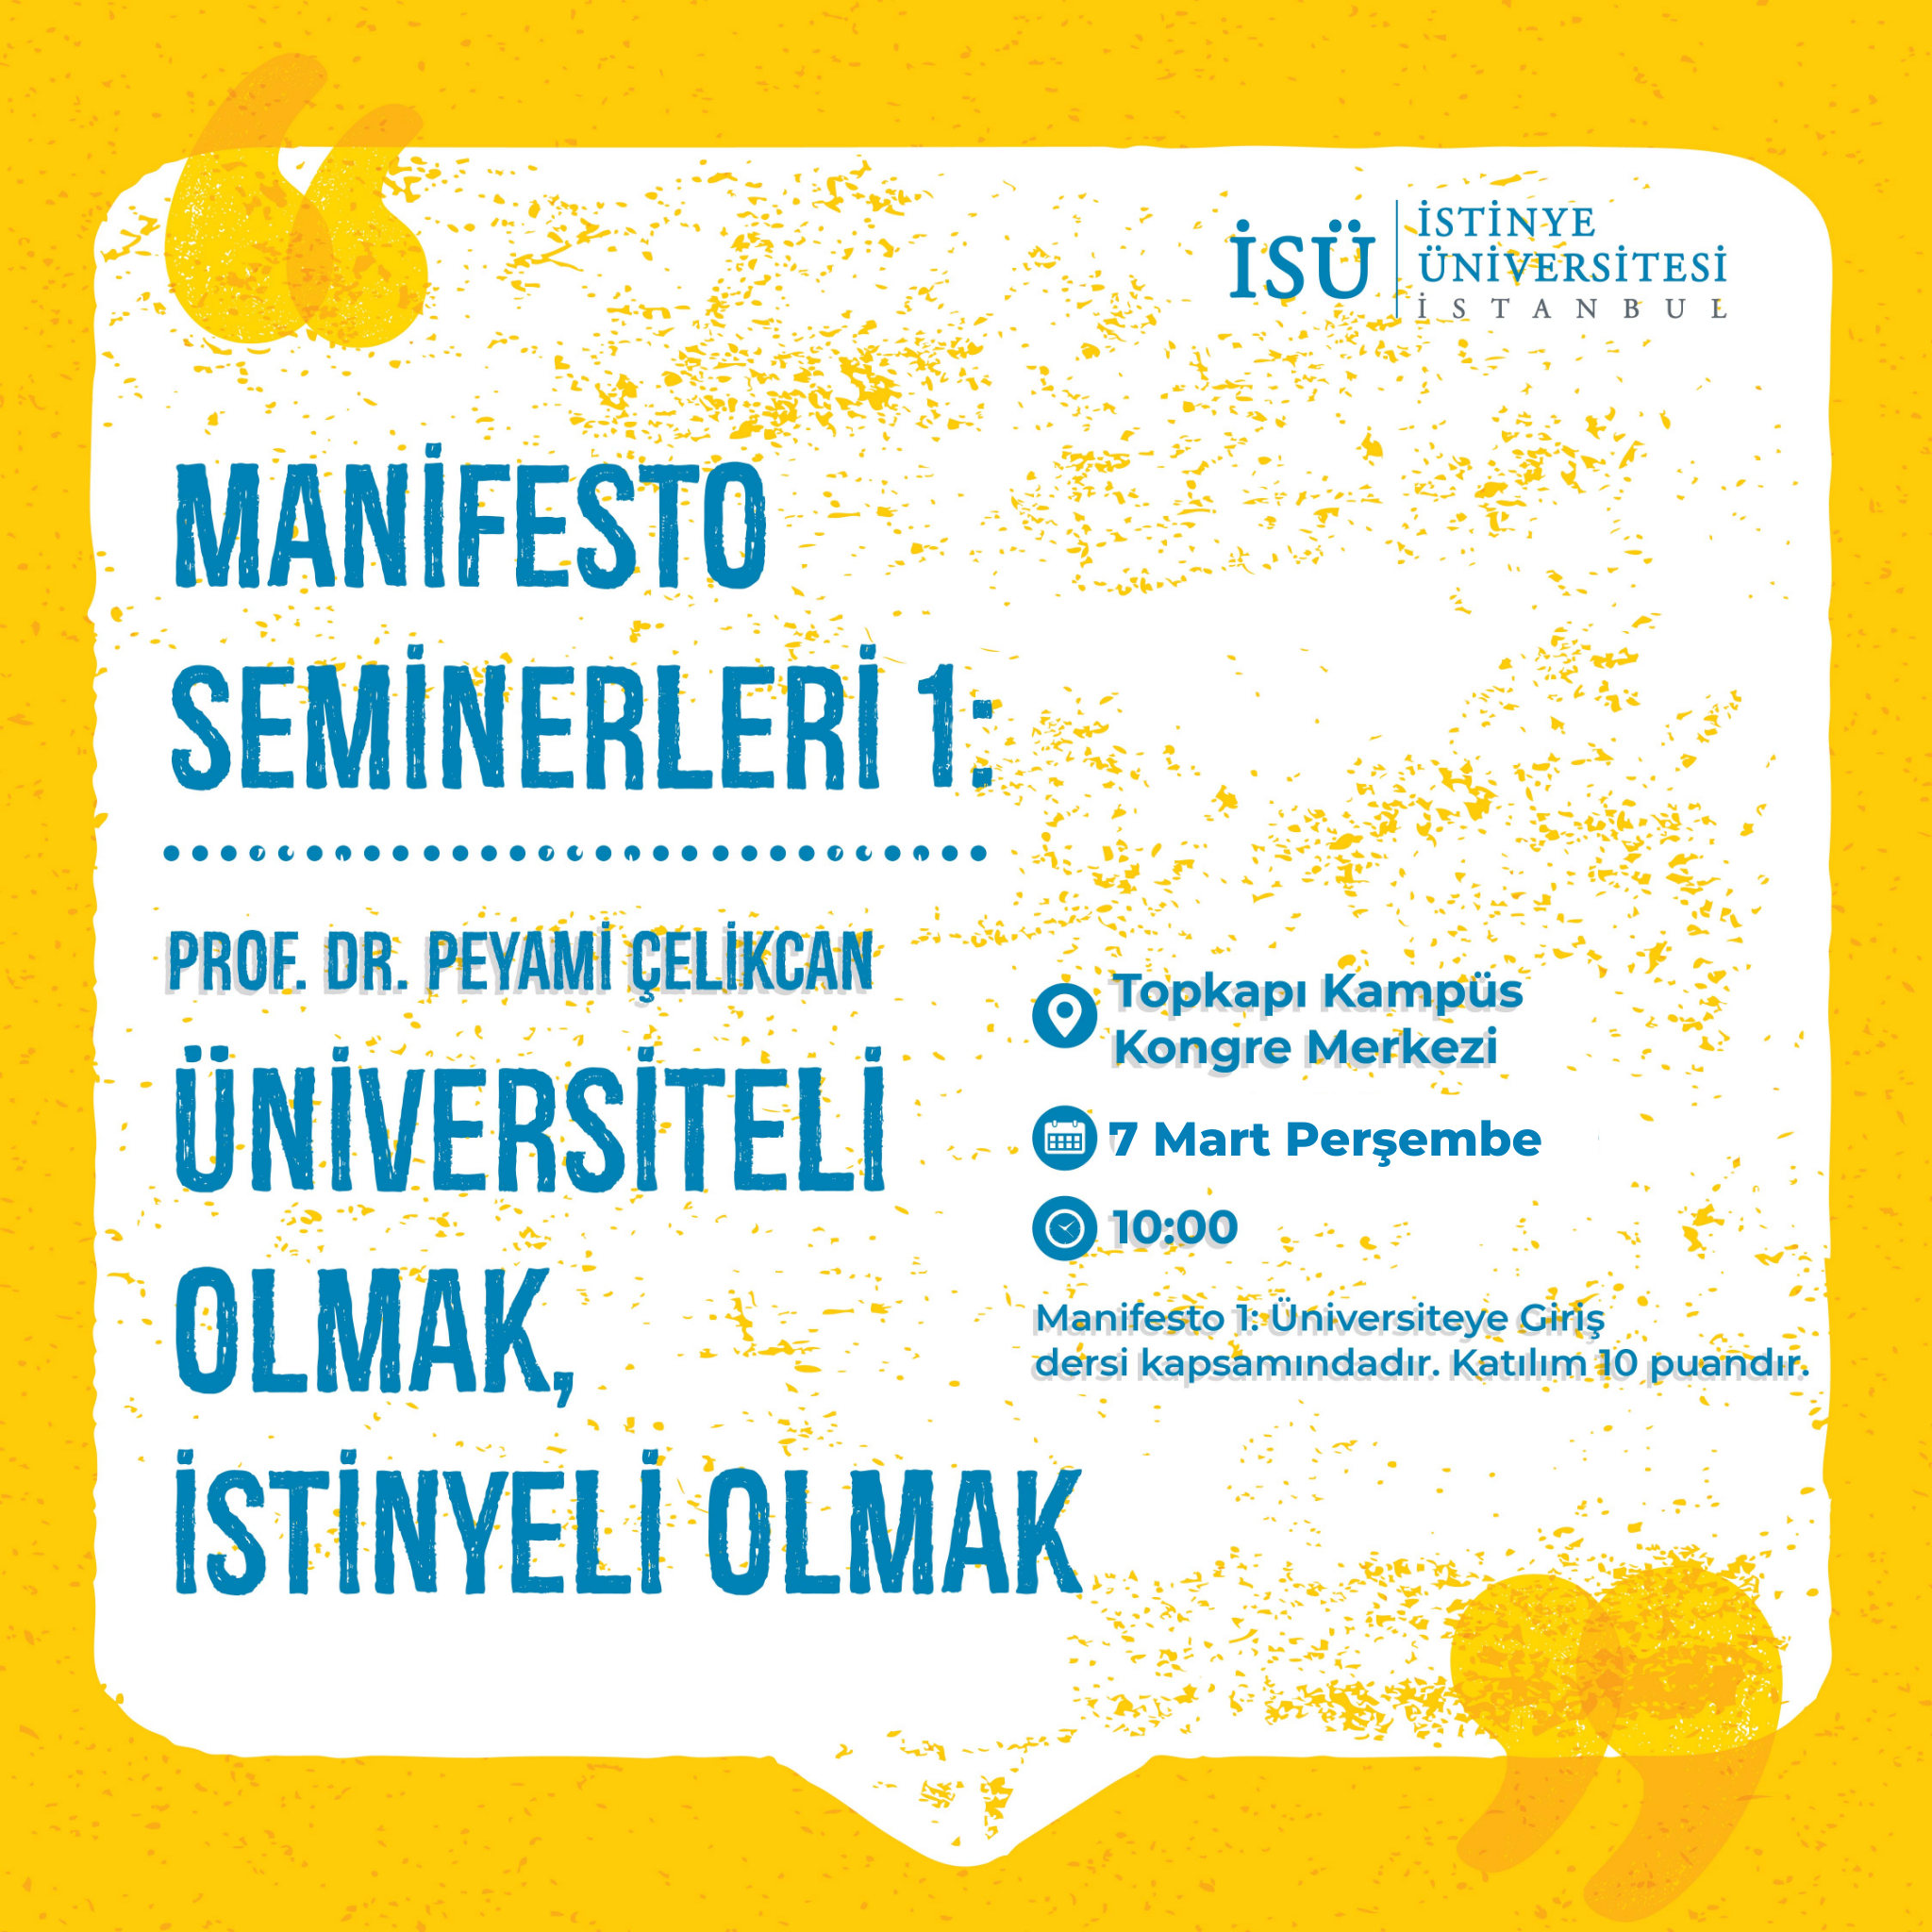 Manifesto Seminars 1 - Being a University Student, Being a Student of İstinye